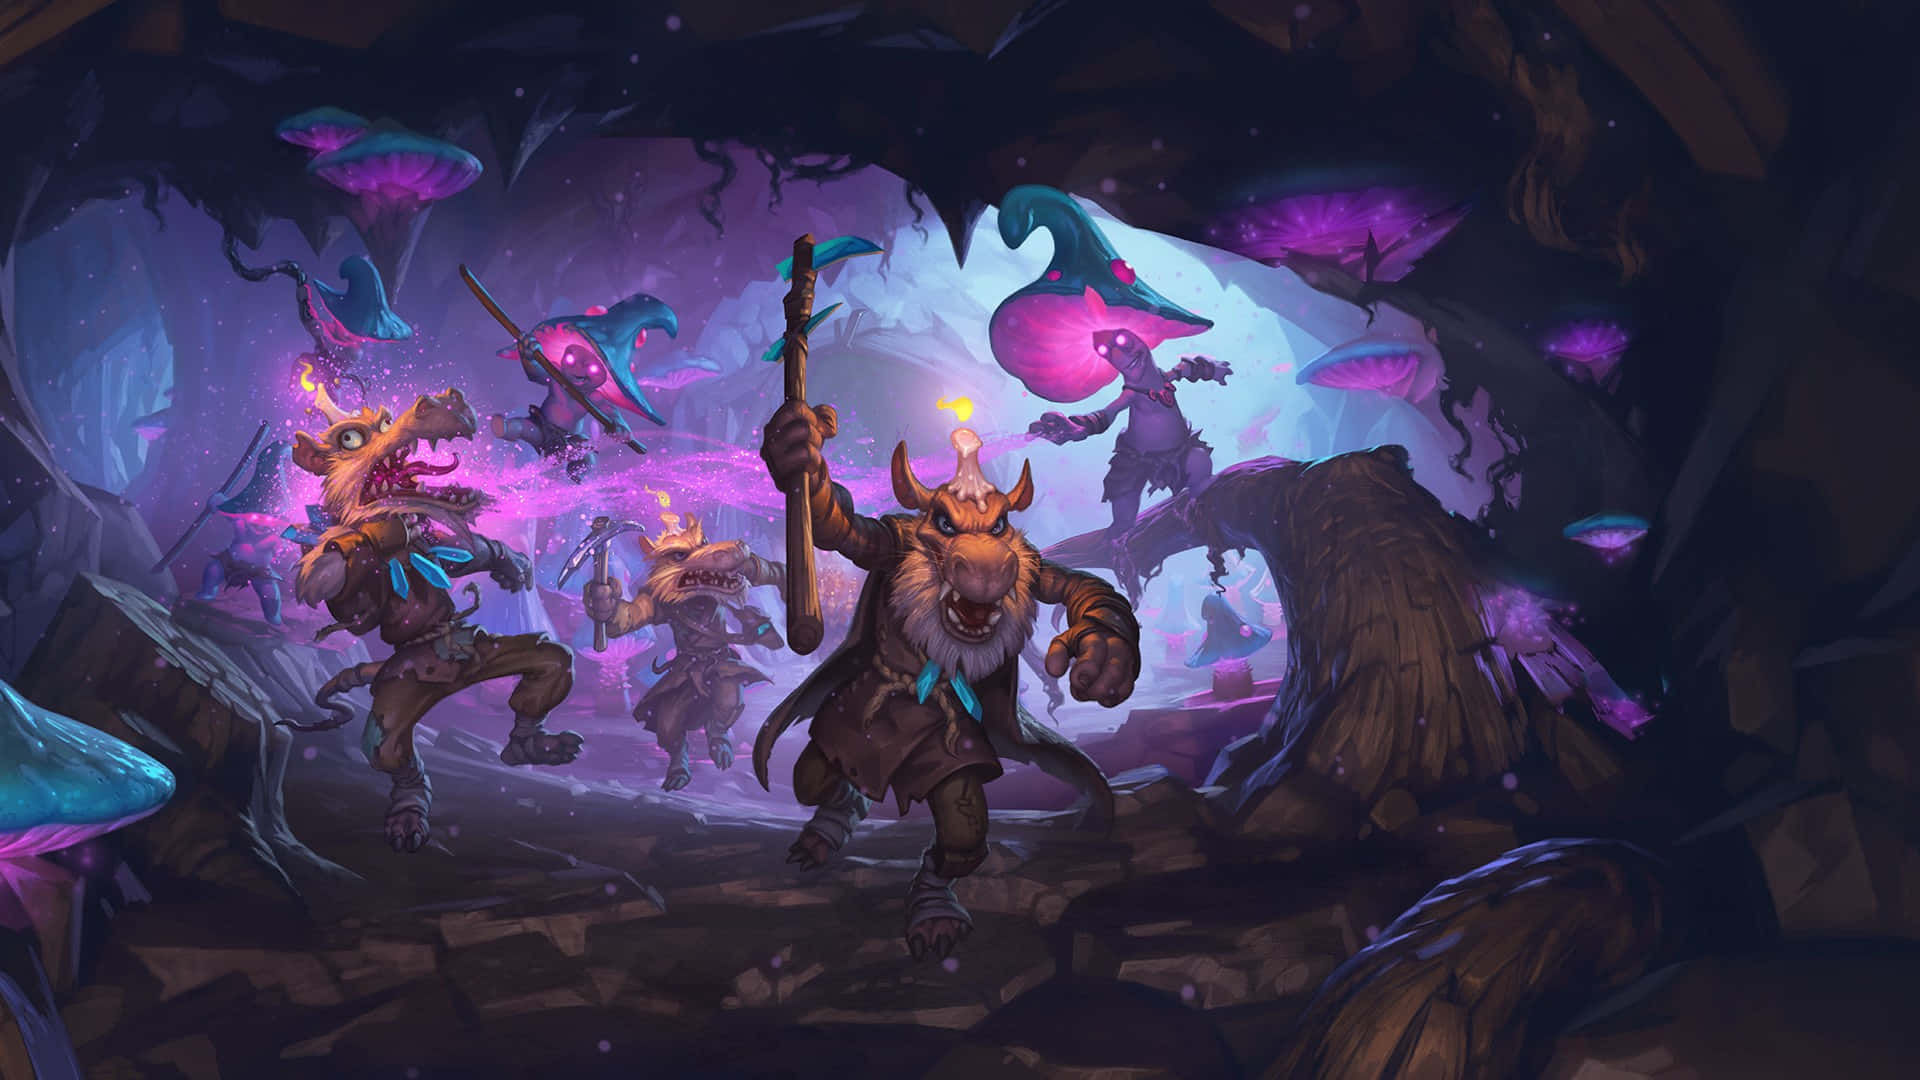 Enjoy the world of Blizzard's Hearthstone with this amazing background